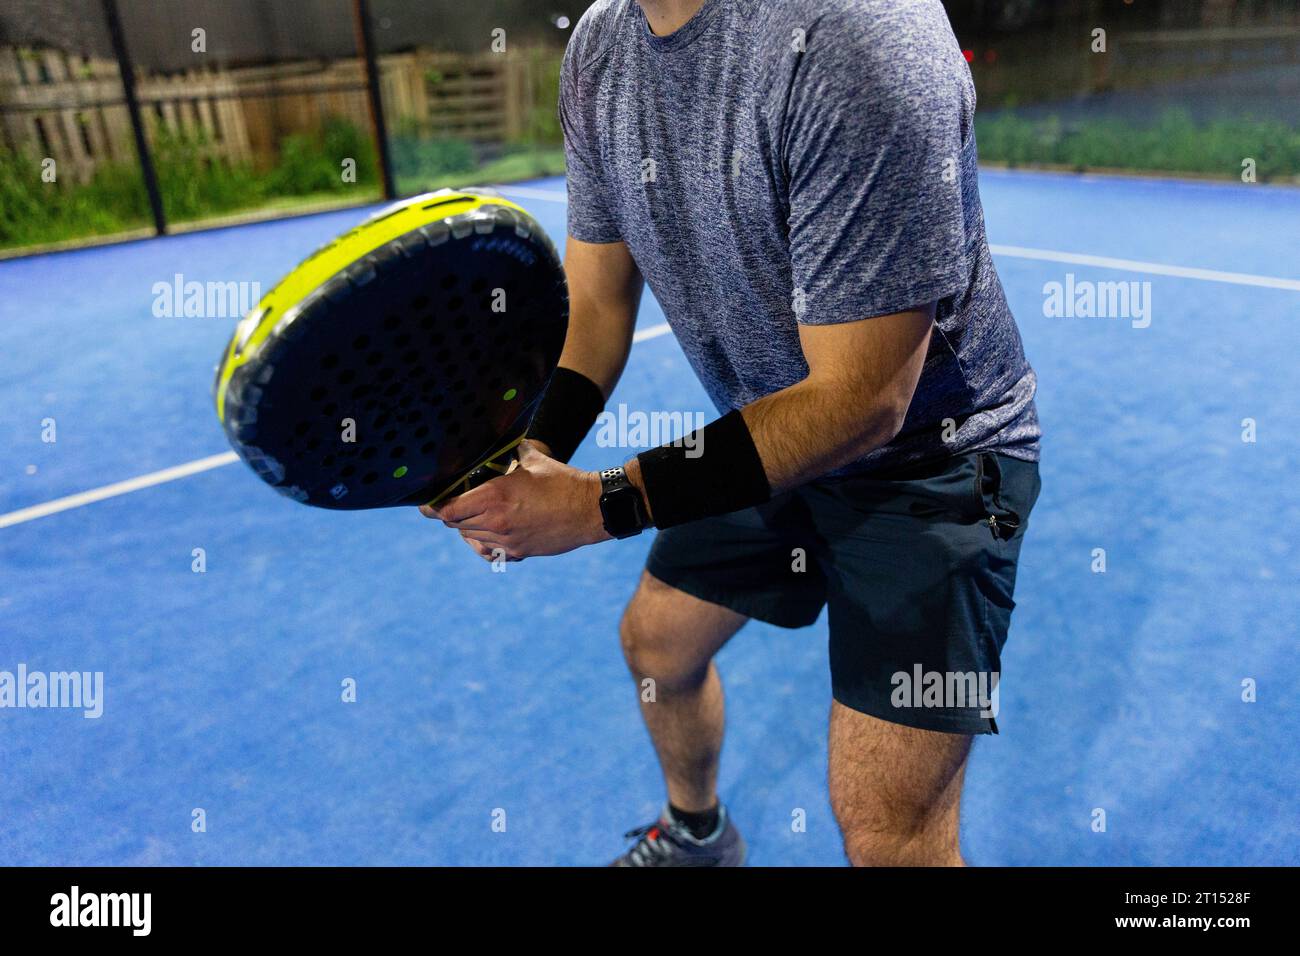 Man playing a padel game in a blue court with his racket Stock Photo